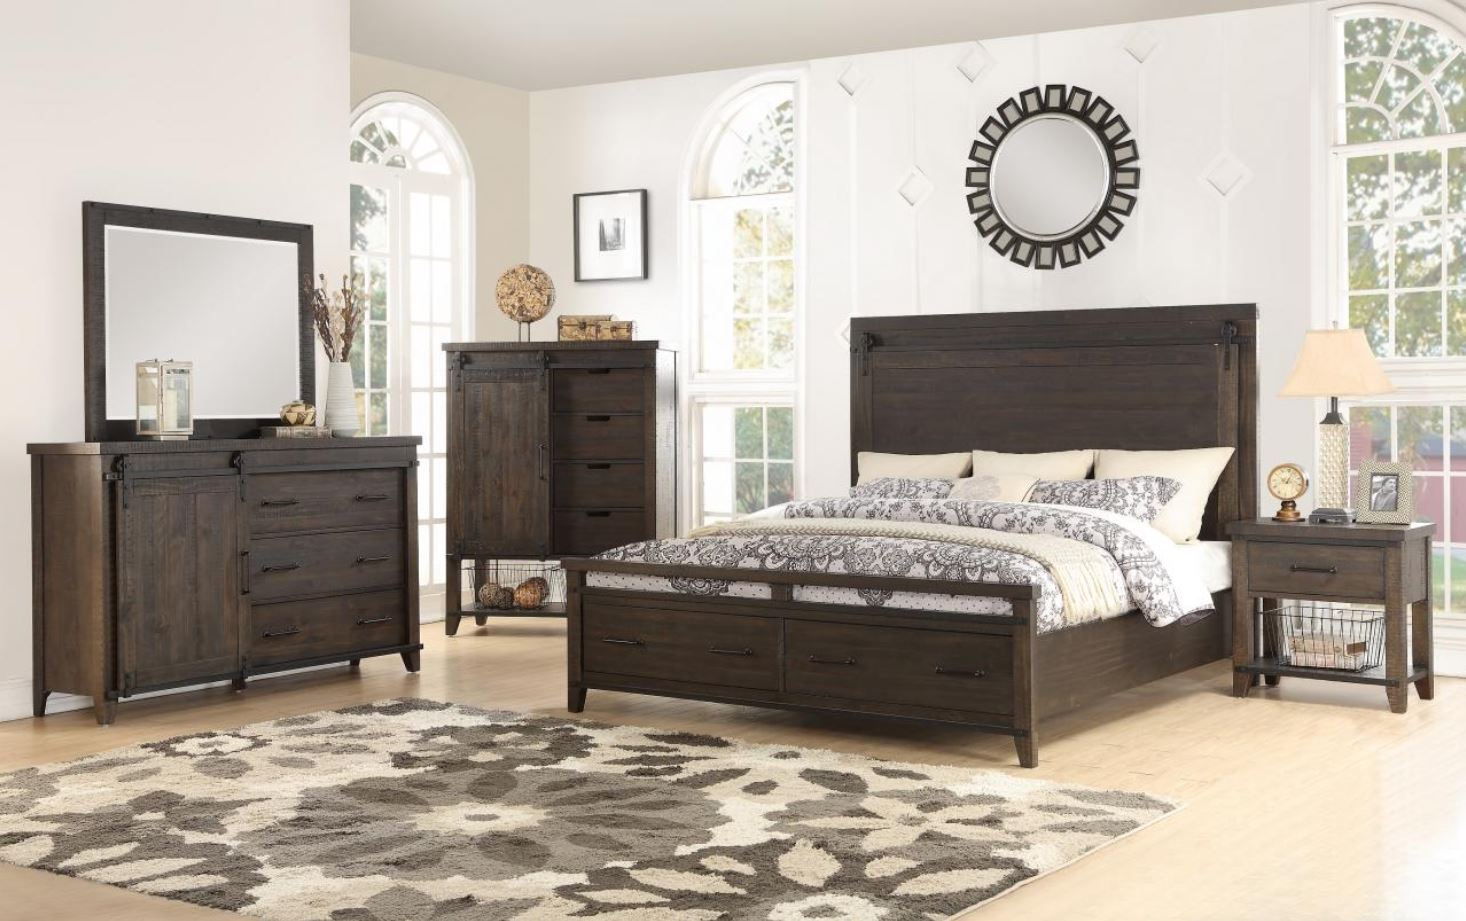 Holland House Furniture 3pc Montana Queen Panel Storage Bed Set P06913179